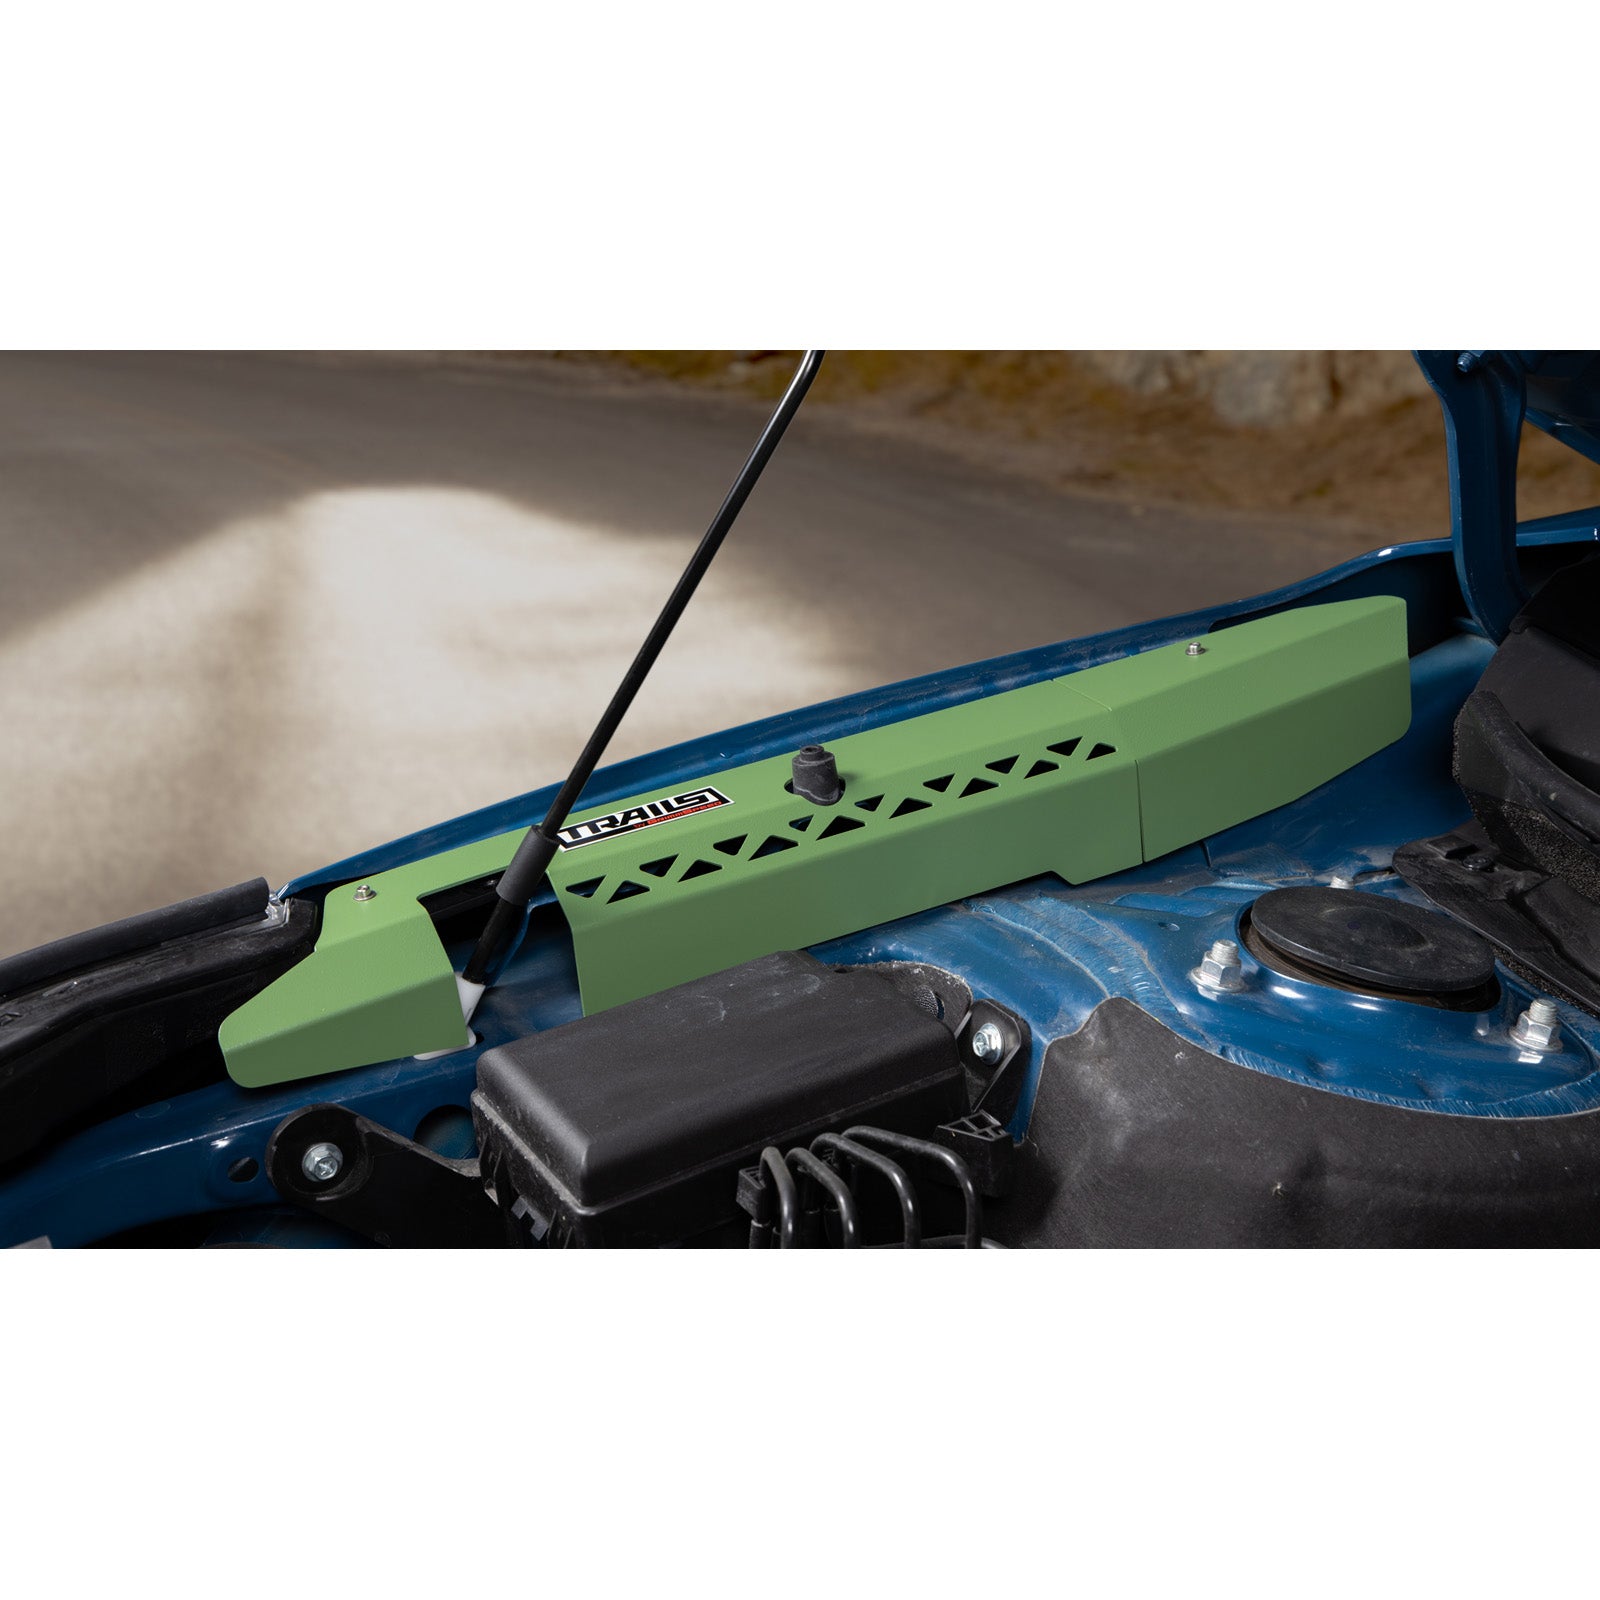 TRAILS by GrimmSpeed Fender Shrouds - Green - 2020+ Subaru Outback